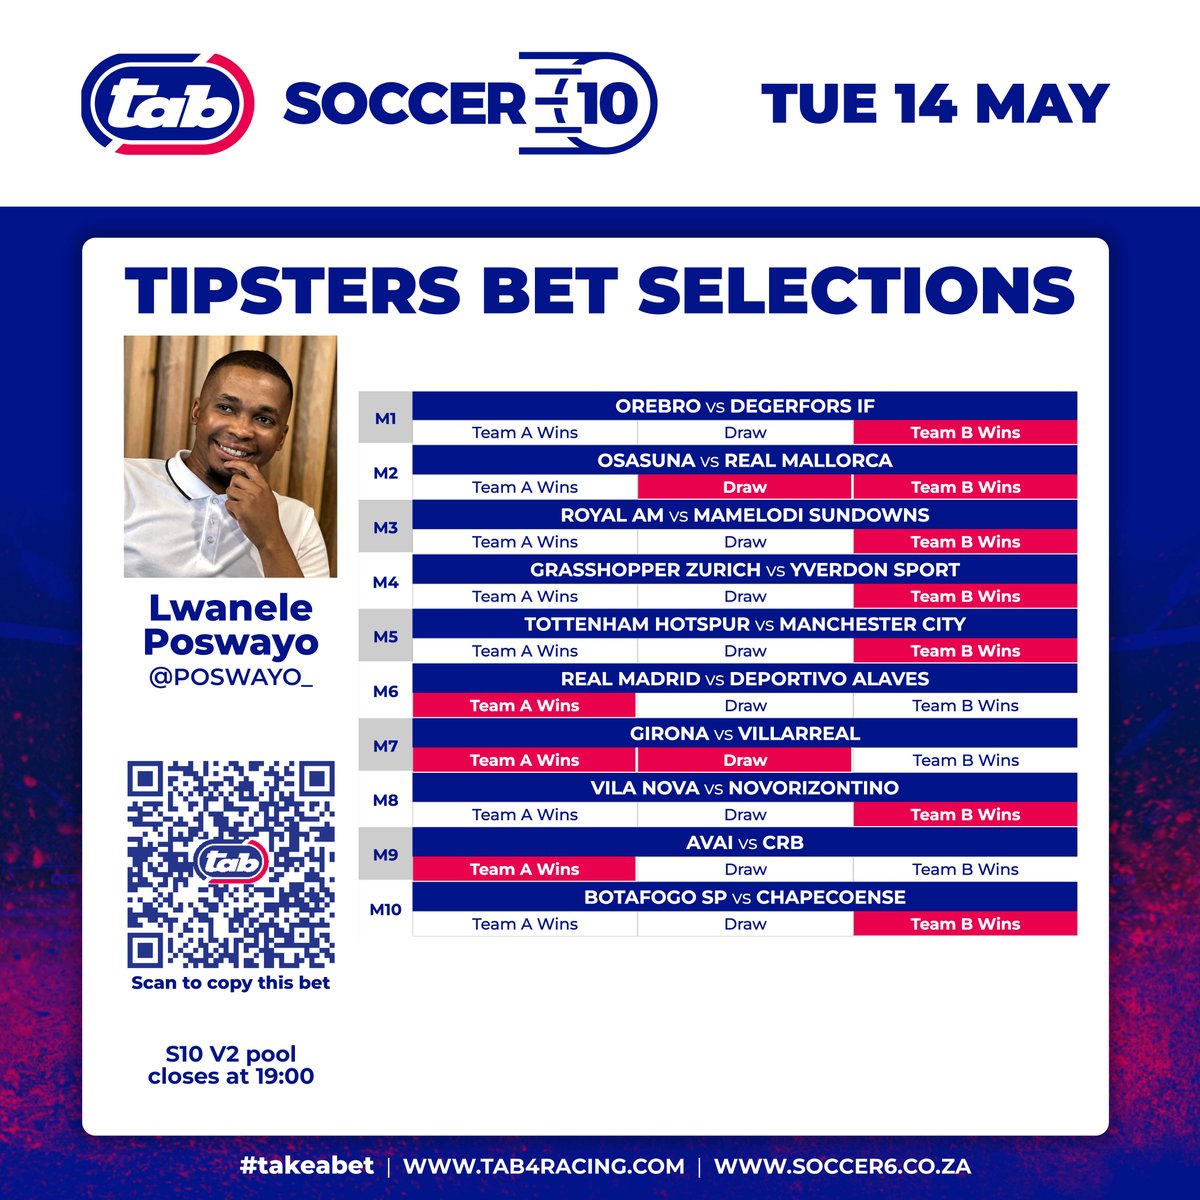 ⚽🔥 Get your game face on! @poswayo_ just dropped the hottest picks for Tuesday's Soccer 10 V2! Hurry, the pool closes at 19:00! Let's score some wins on the following link:hubs.li/Q02x3CwK0! 💪💰 #Soccer10 #Tipster #TAB